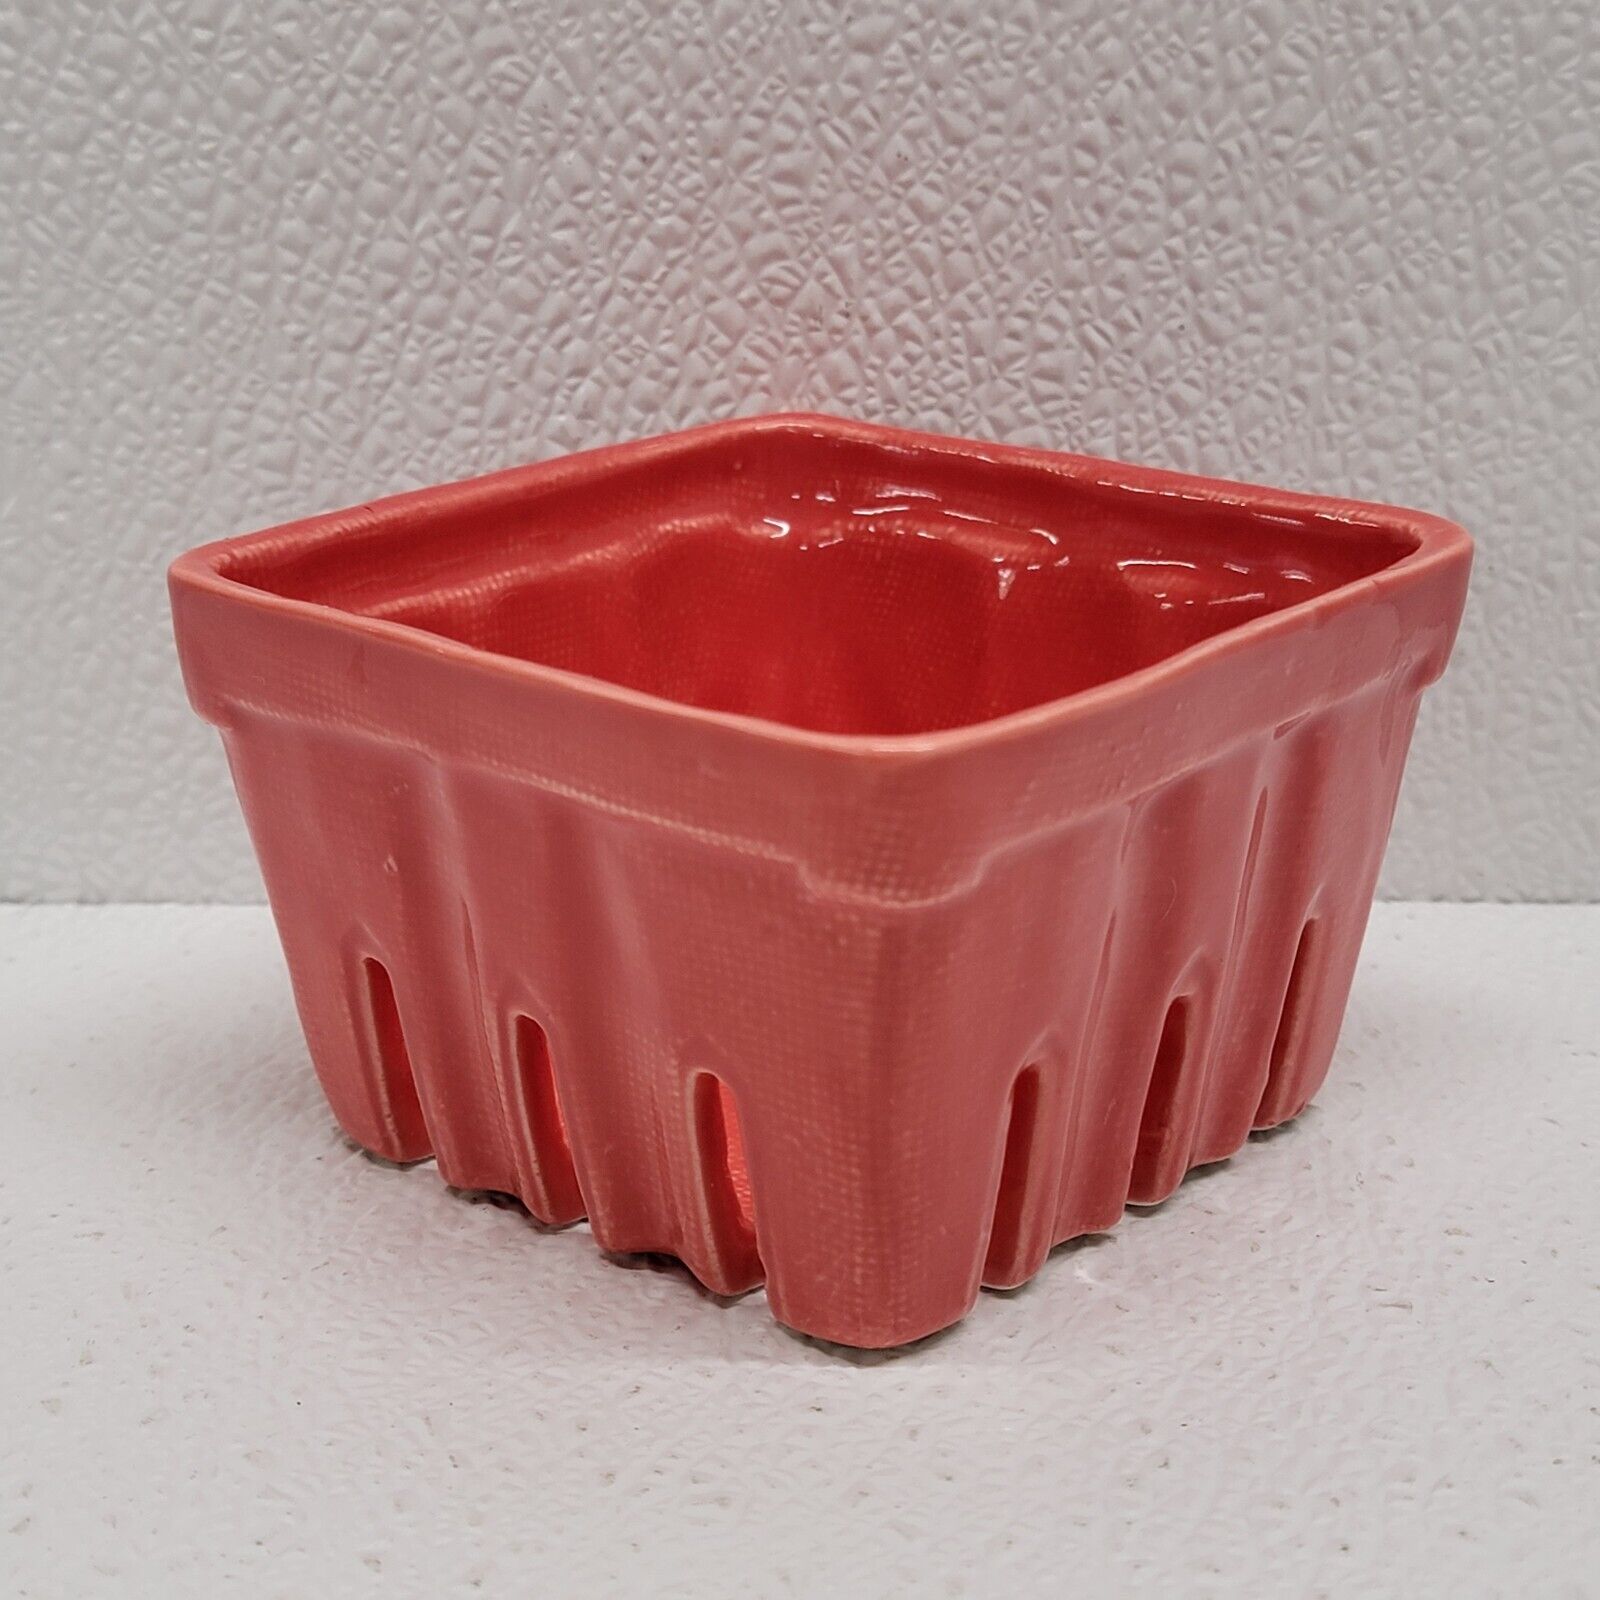 Anthropologie Red Ceramic Berry Basket Fruit Container